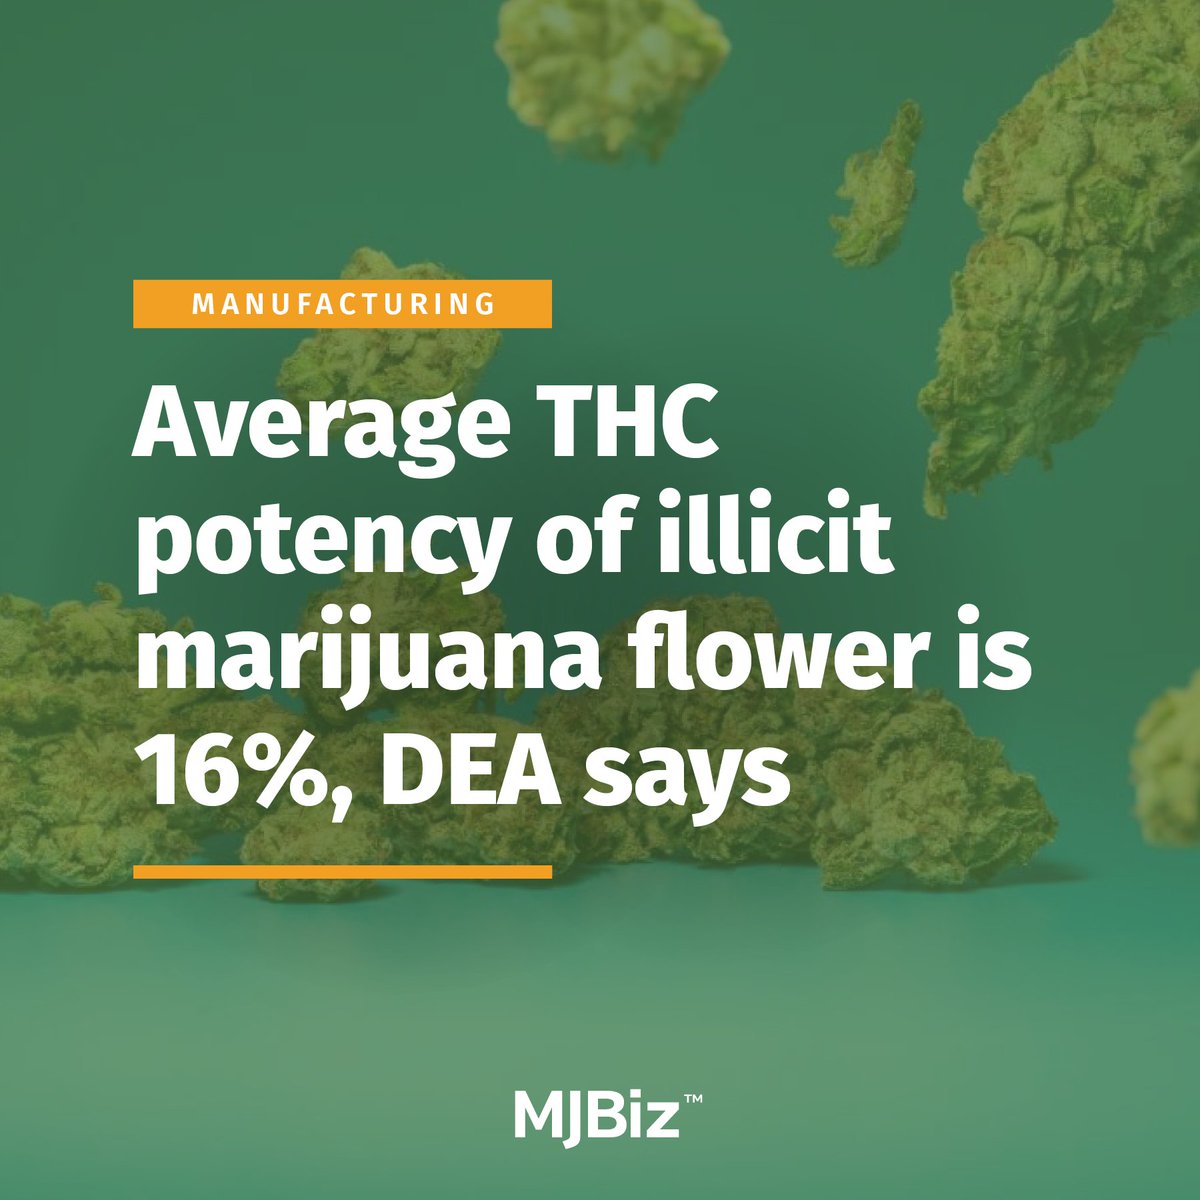 The average THC potency of illicit marijuana flower in the United States is 16%, according to the U.S. Drug Enforcement Administration. That’s well below the THC levels seen in commercial #marijuana stores, where accusations of THC potency inflation have been circulating for